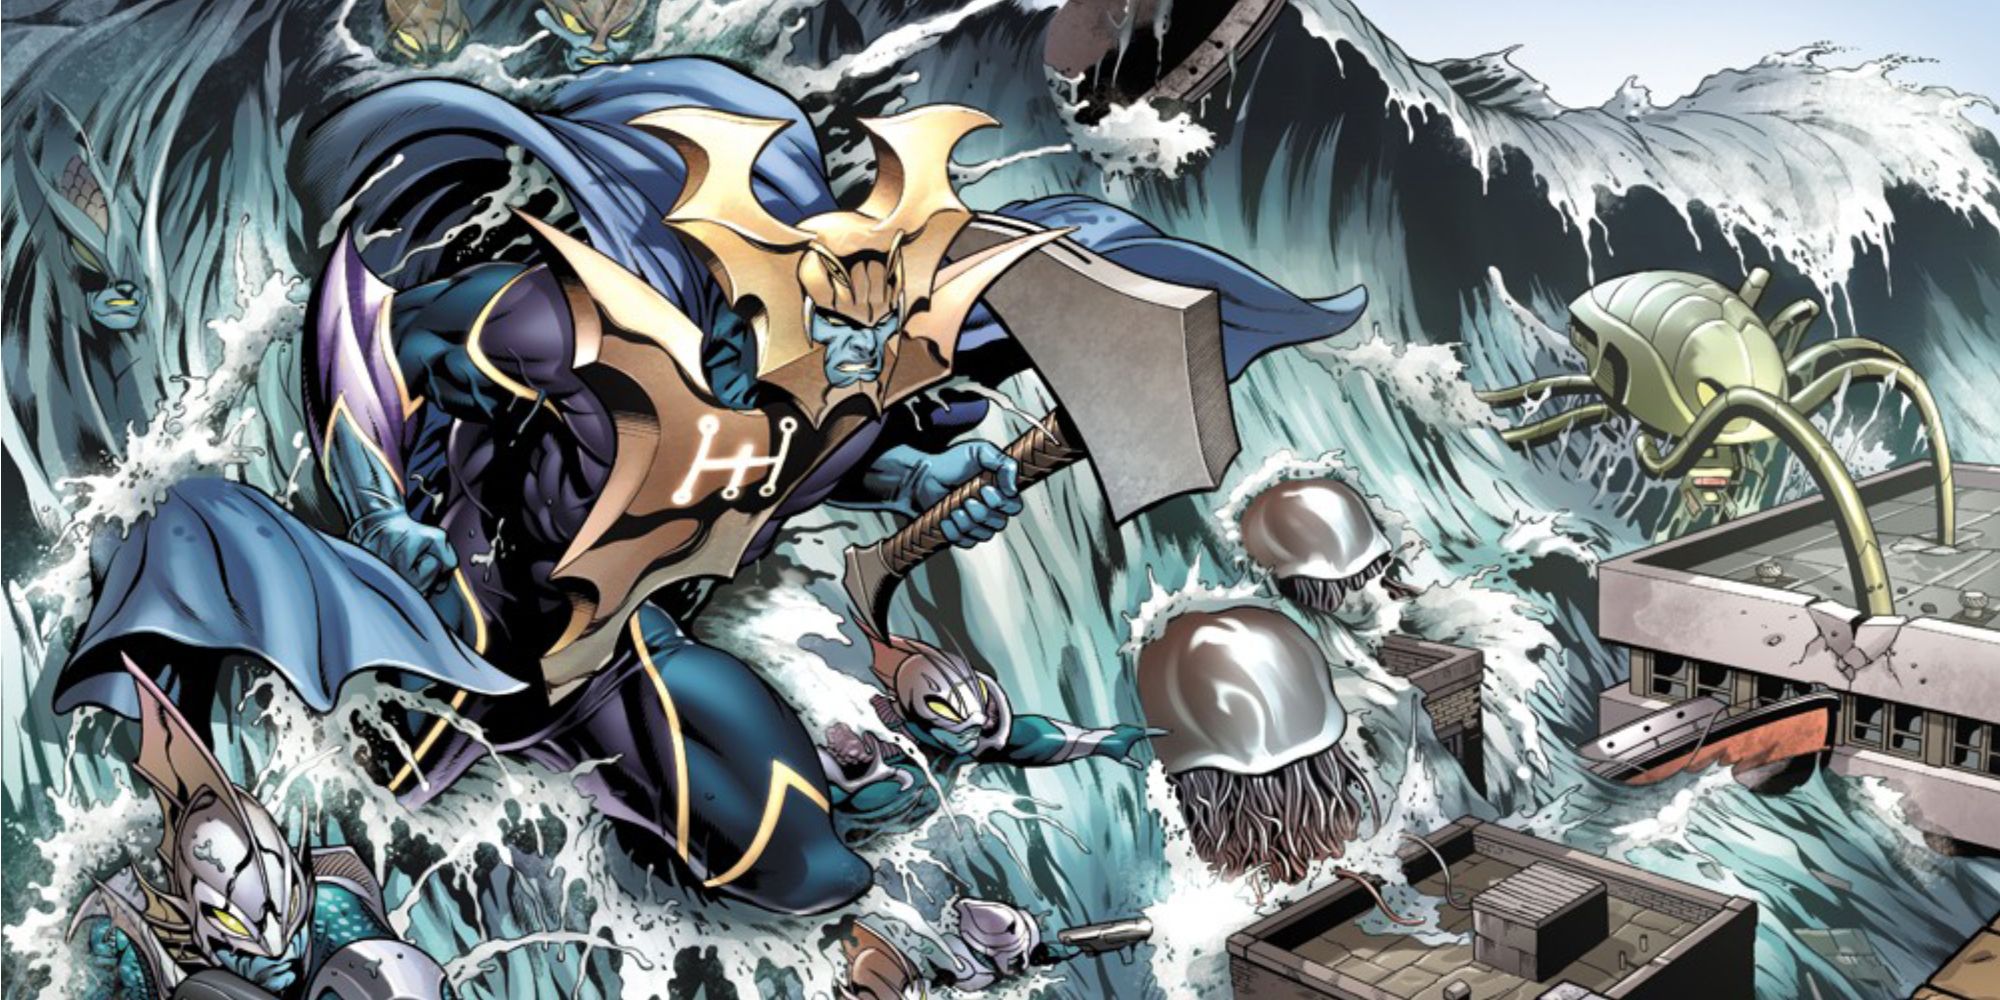 Attuma unleashes a tidal wave against the surface in Marvel Comics.